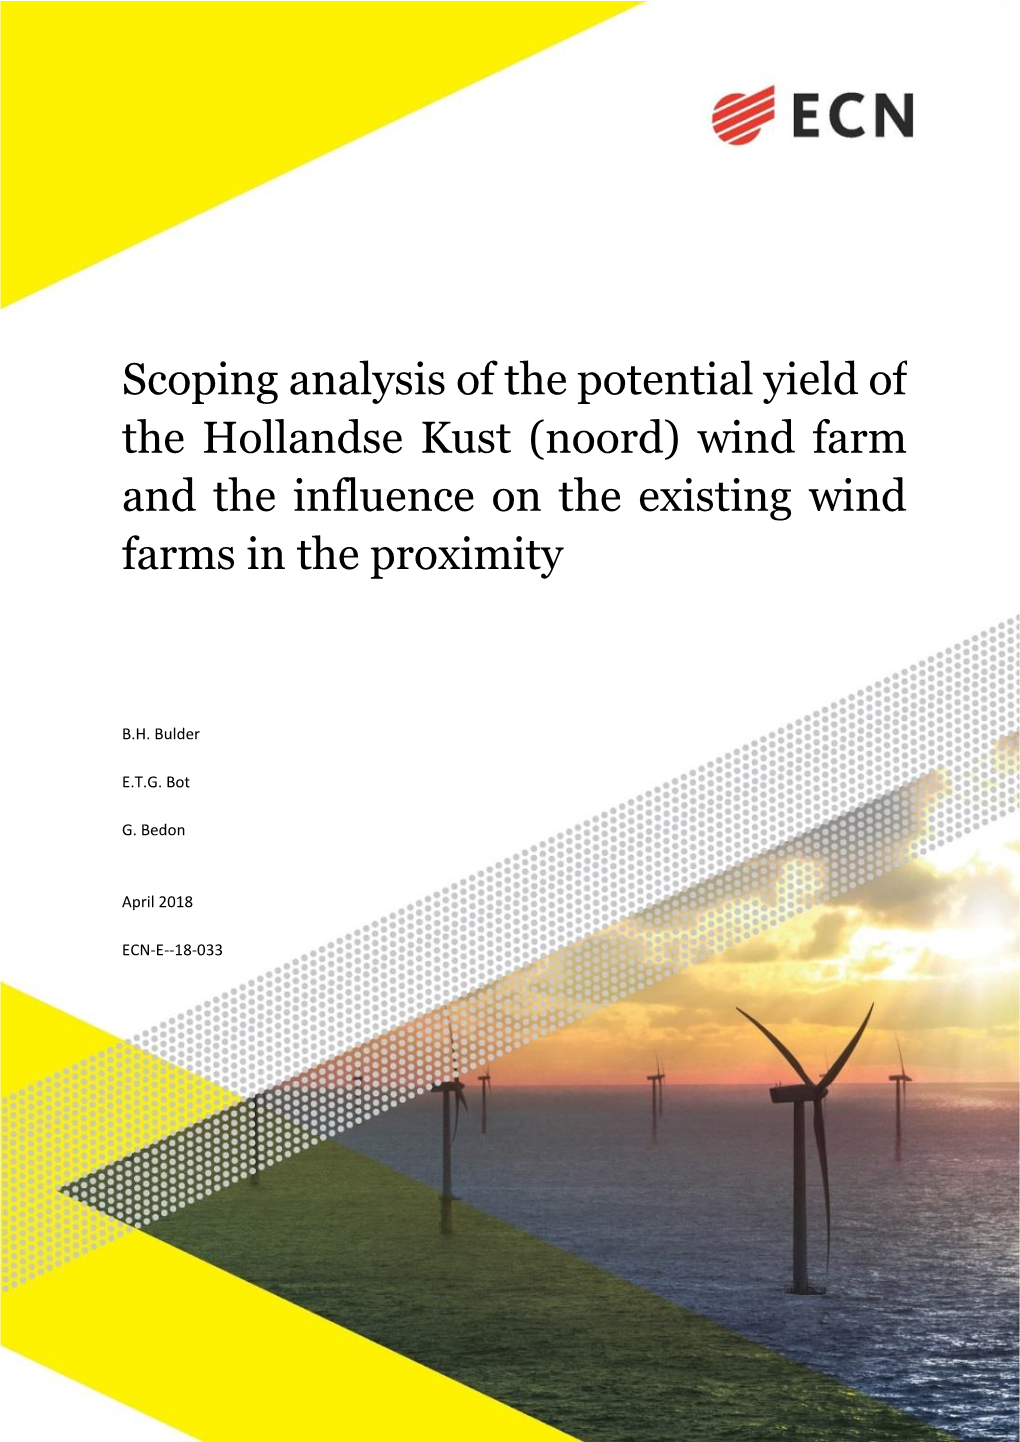 Scoping Analysis of the Potential Yield of the Hollandse Kust (Noord) Wind Farm and the Influence on the Existing Wind Farms in the Proximity